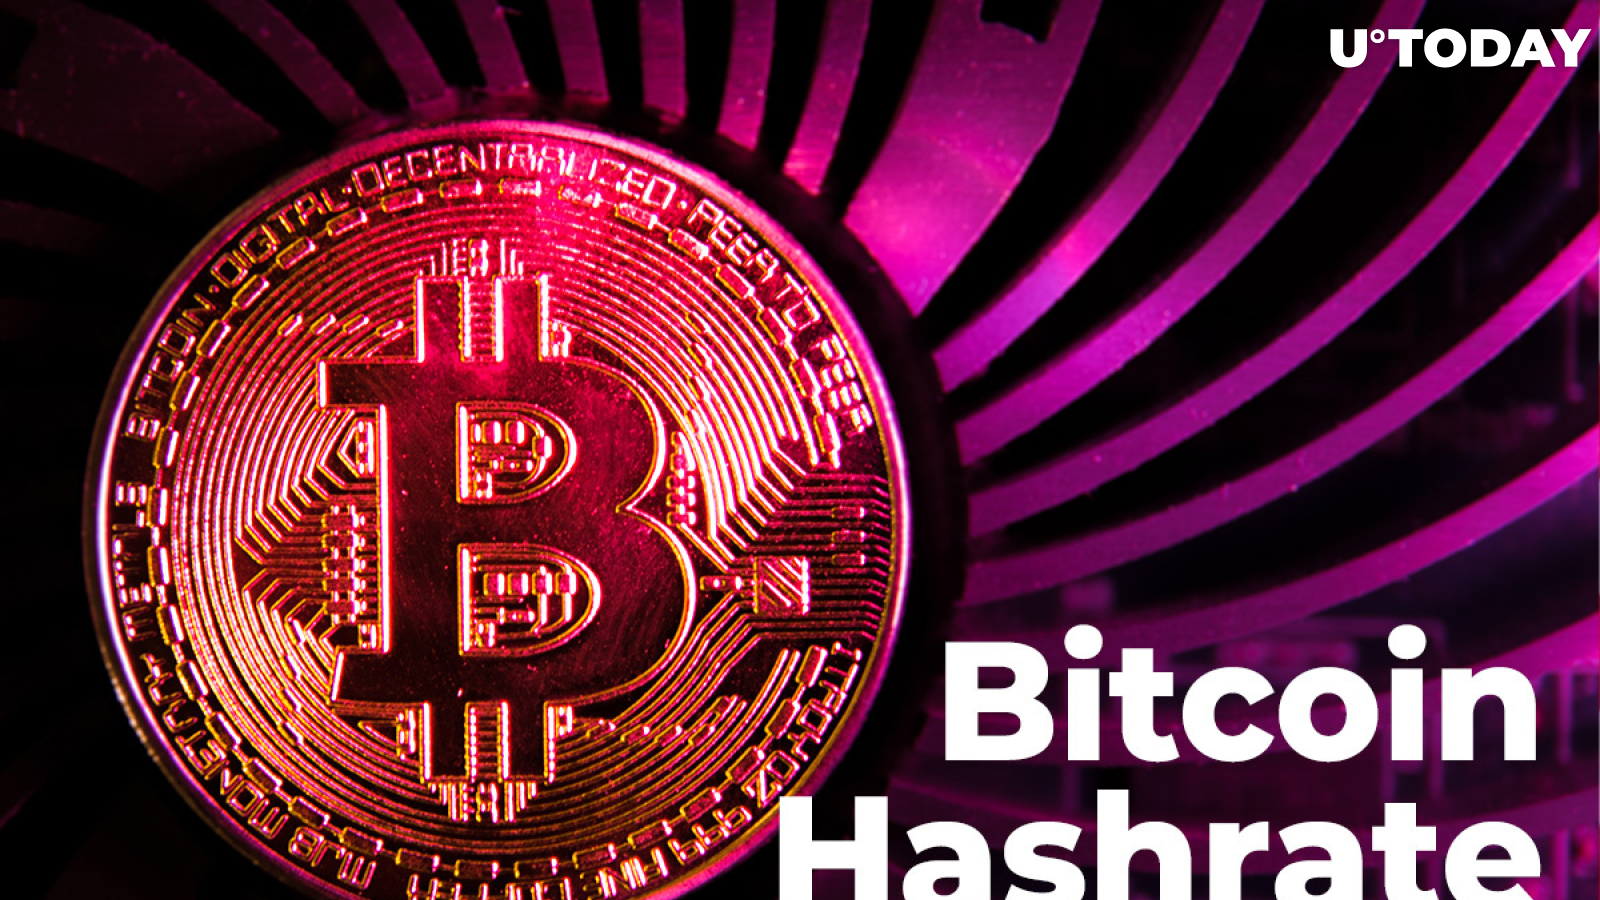 Bitcoin Hashrate Prints New All-Time High